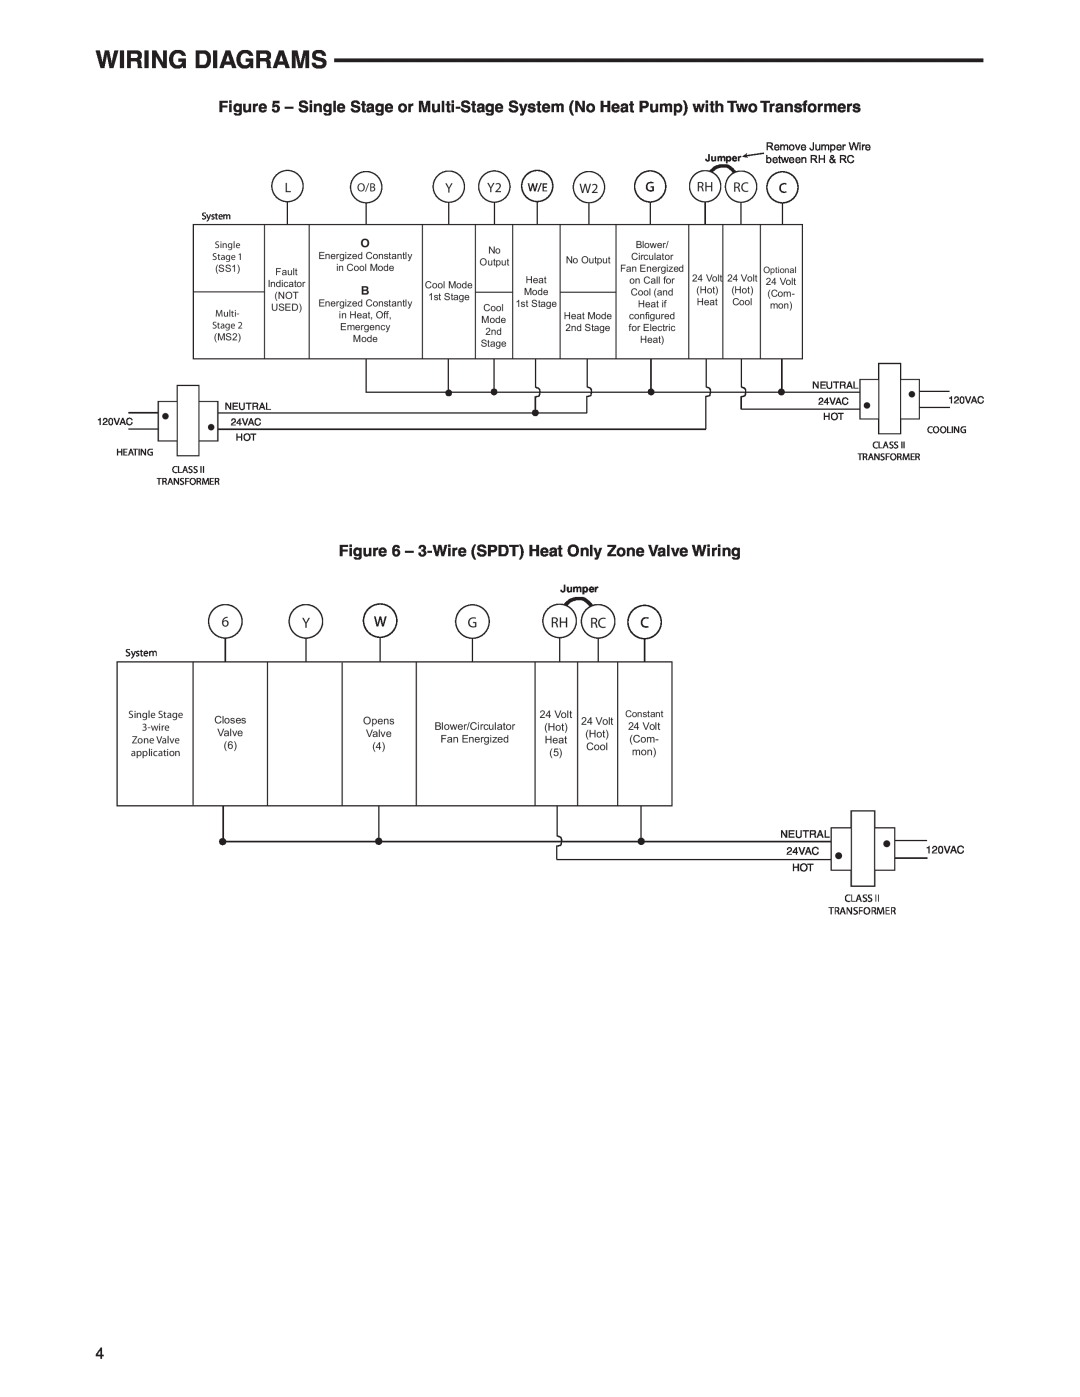 White Rodgers 1F95-0477 Wiring Diagrams, Rh Rc, Jumper, System, Single Stage 3-wire, NEUTRAL 24VAC HOT, 120VAC, Multi 